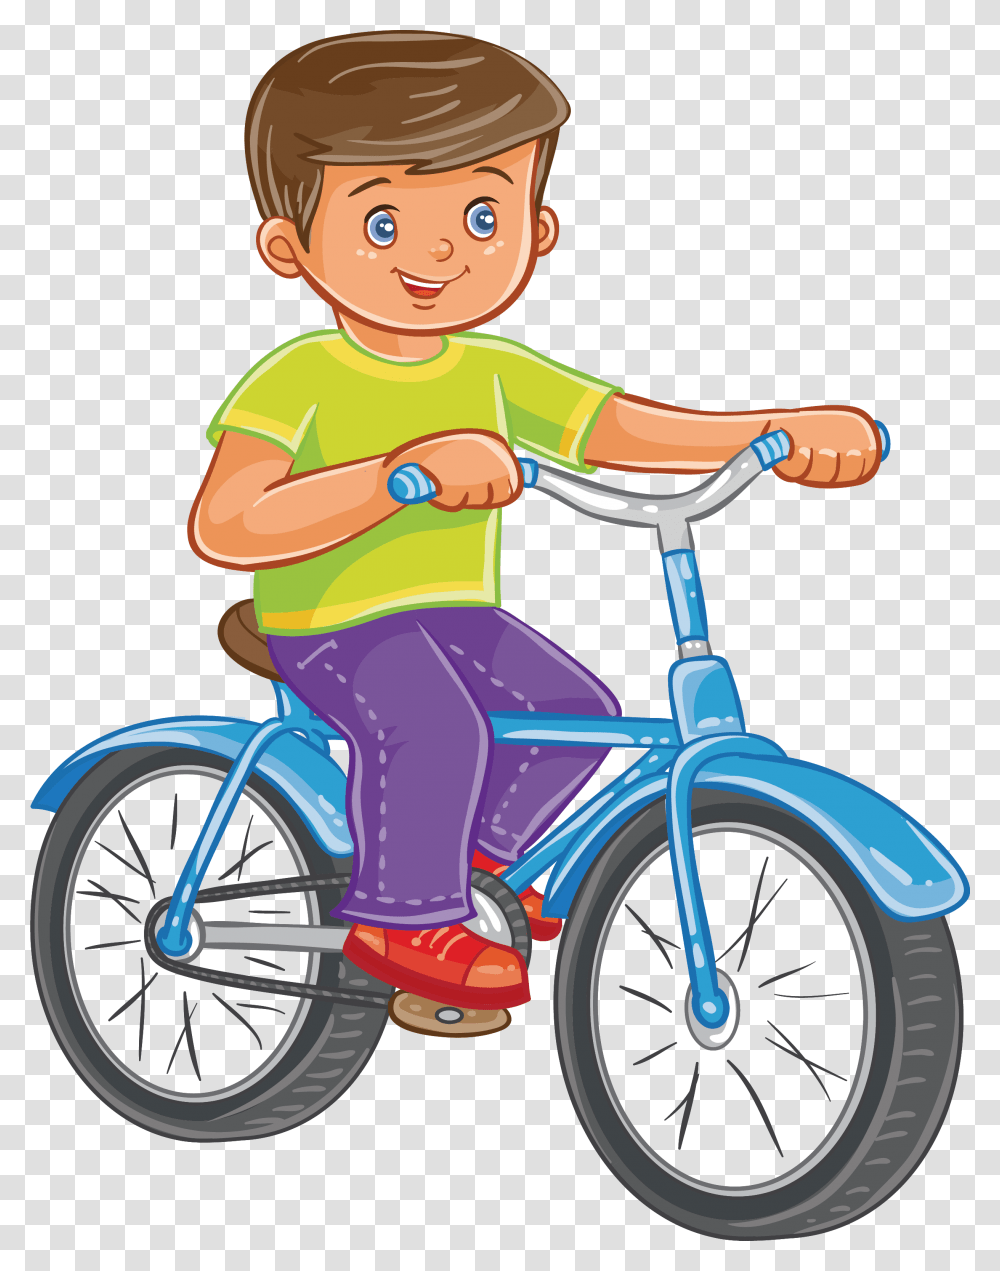 Cyclist Cartoon Pictures Of Cycling, Motorcycle, Vehicle, Transportation, Person Transparent Png